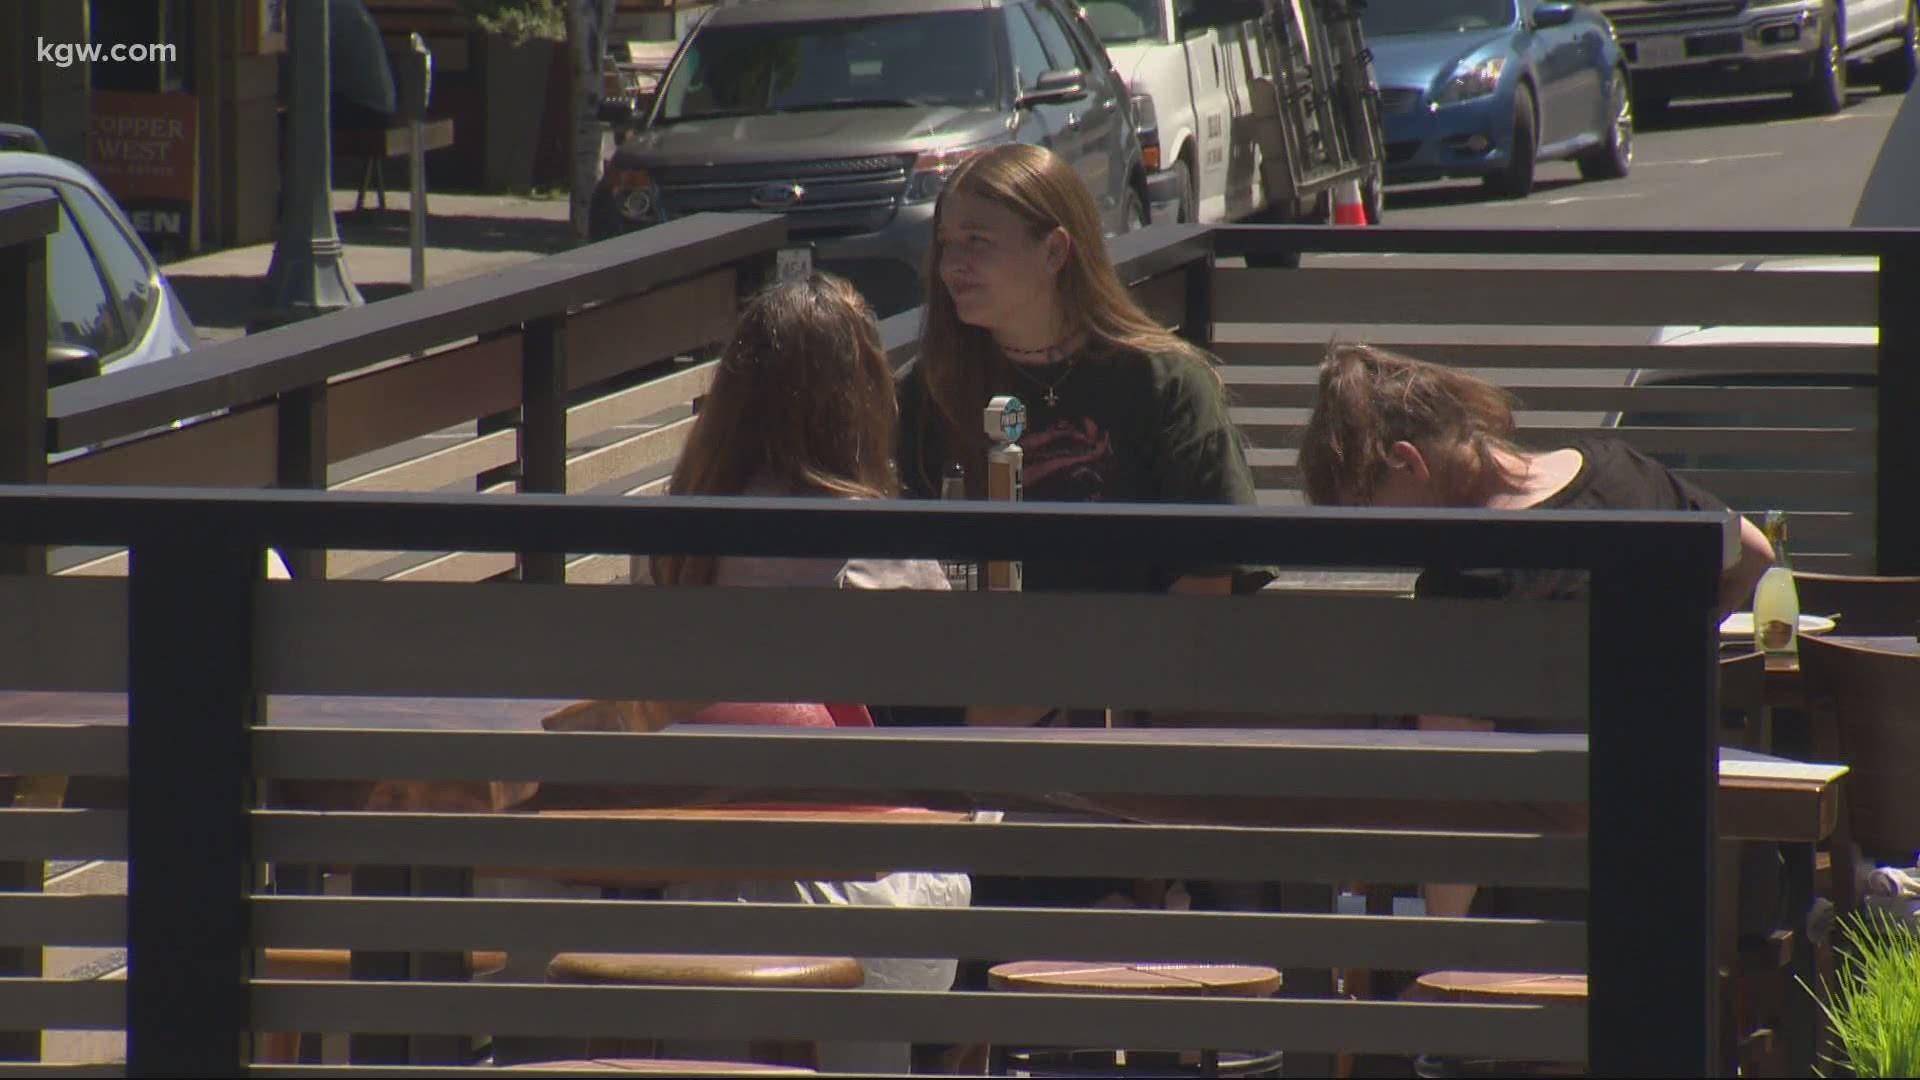 Hood River and Oregon Department of Transportation are working on plan to make outdoor seating a viable option.